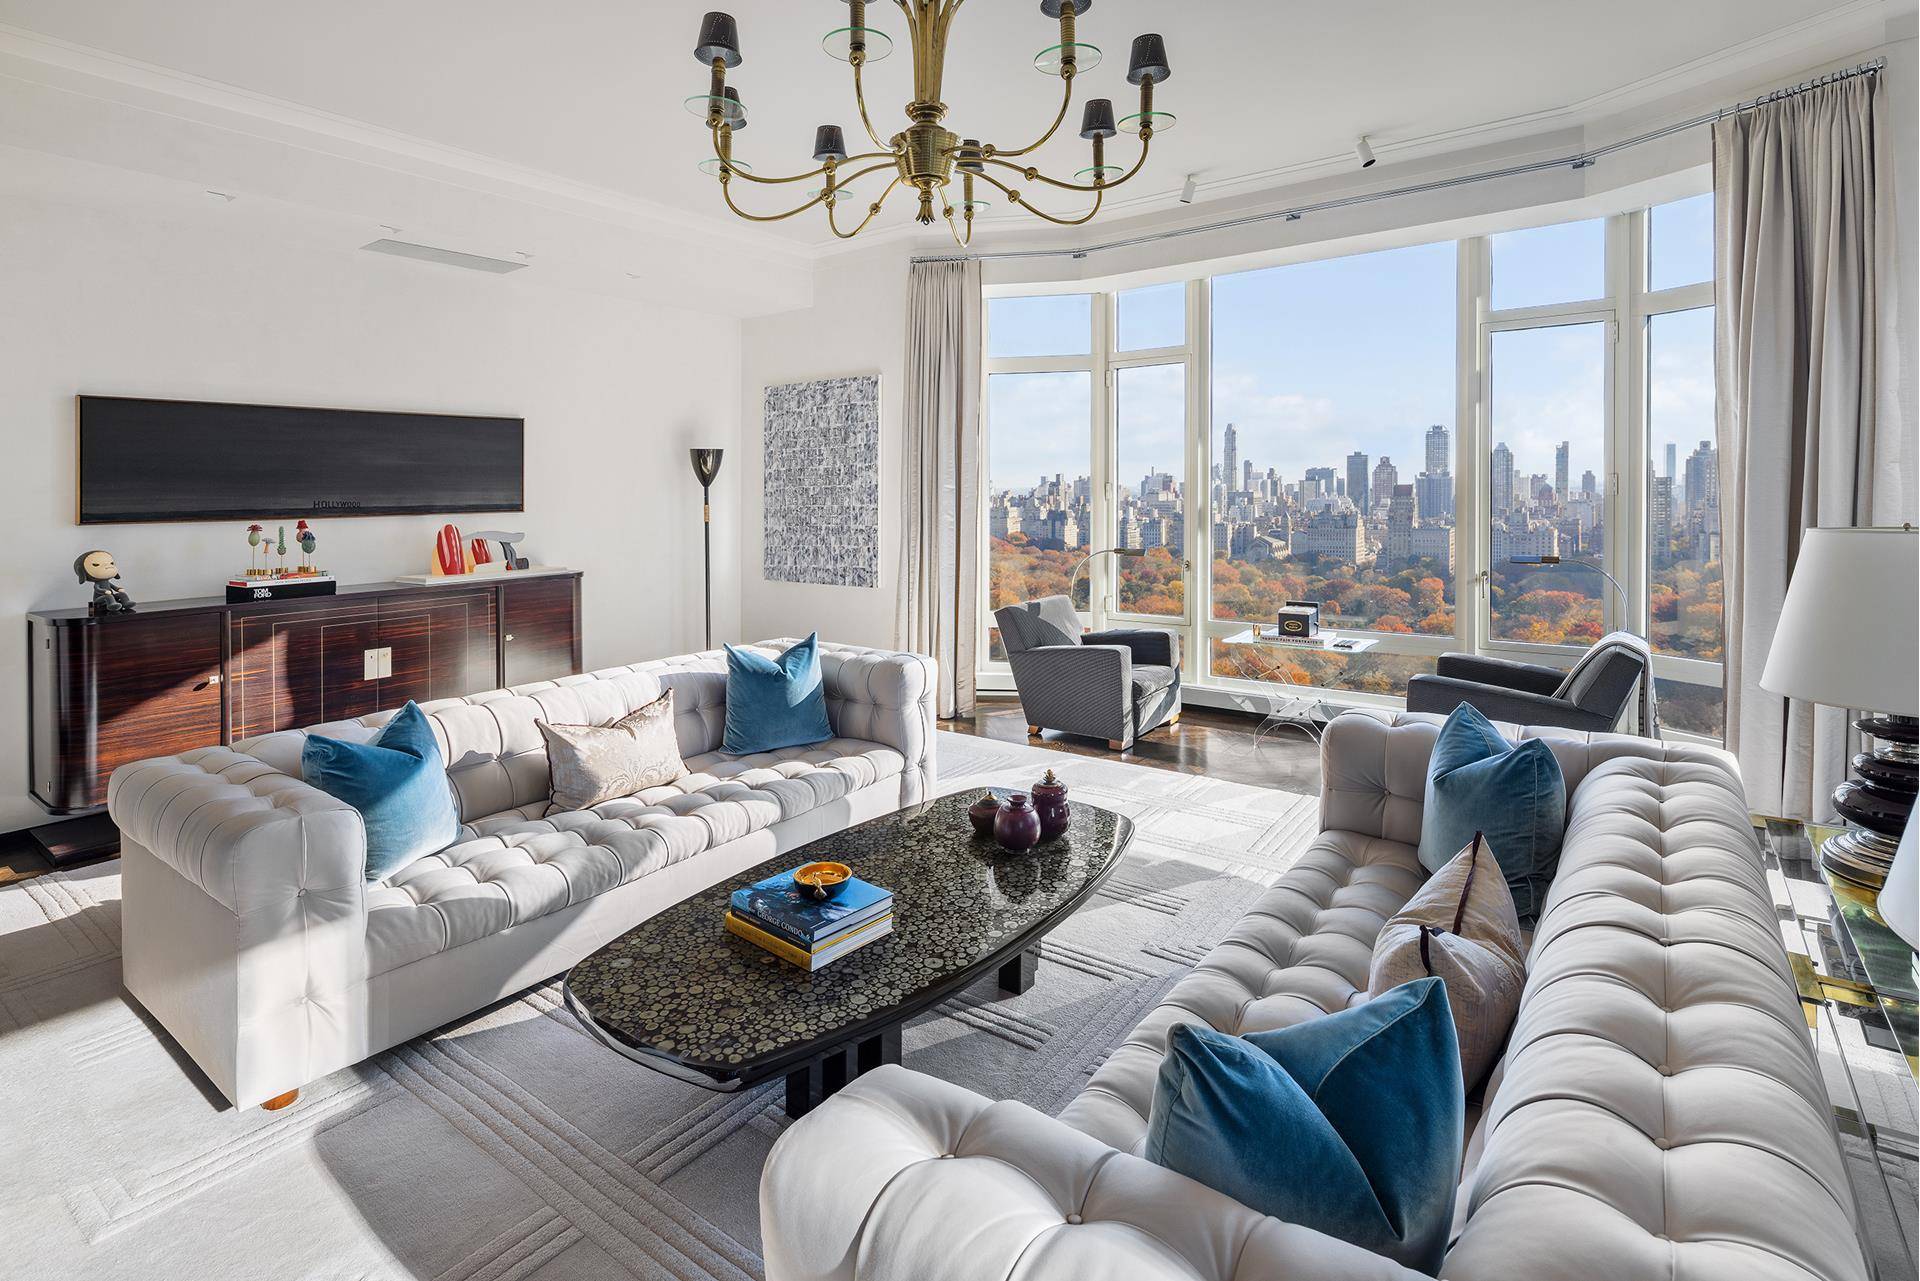 This residence at Fifteen Central Park West, a building that has redefined luxury in New York, features commanding views over Central Park from one of its highest floors.